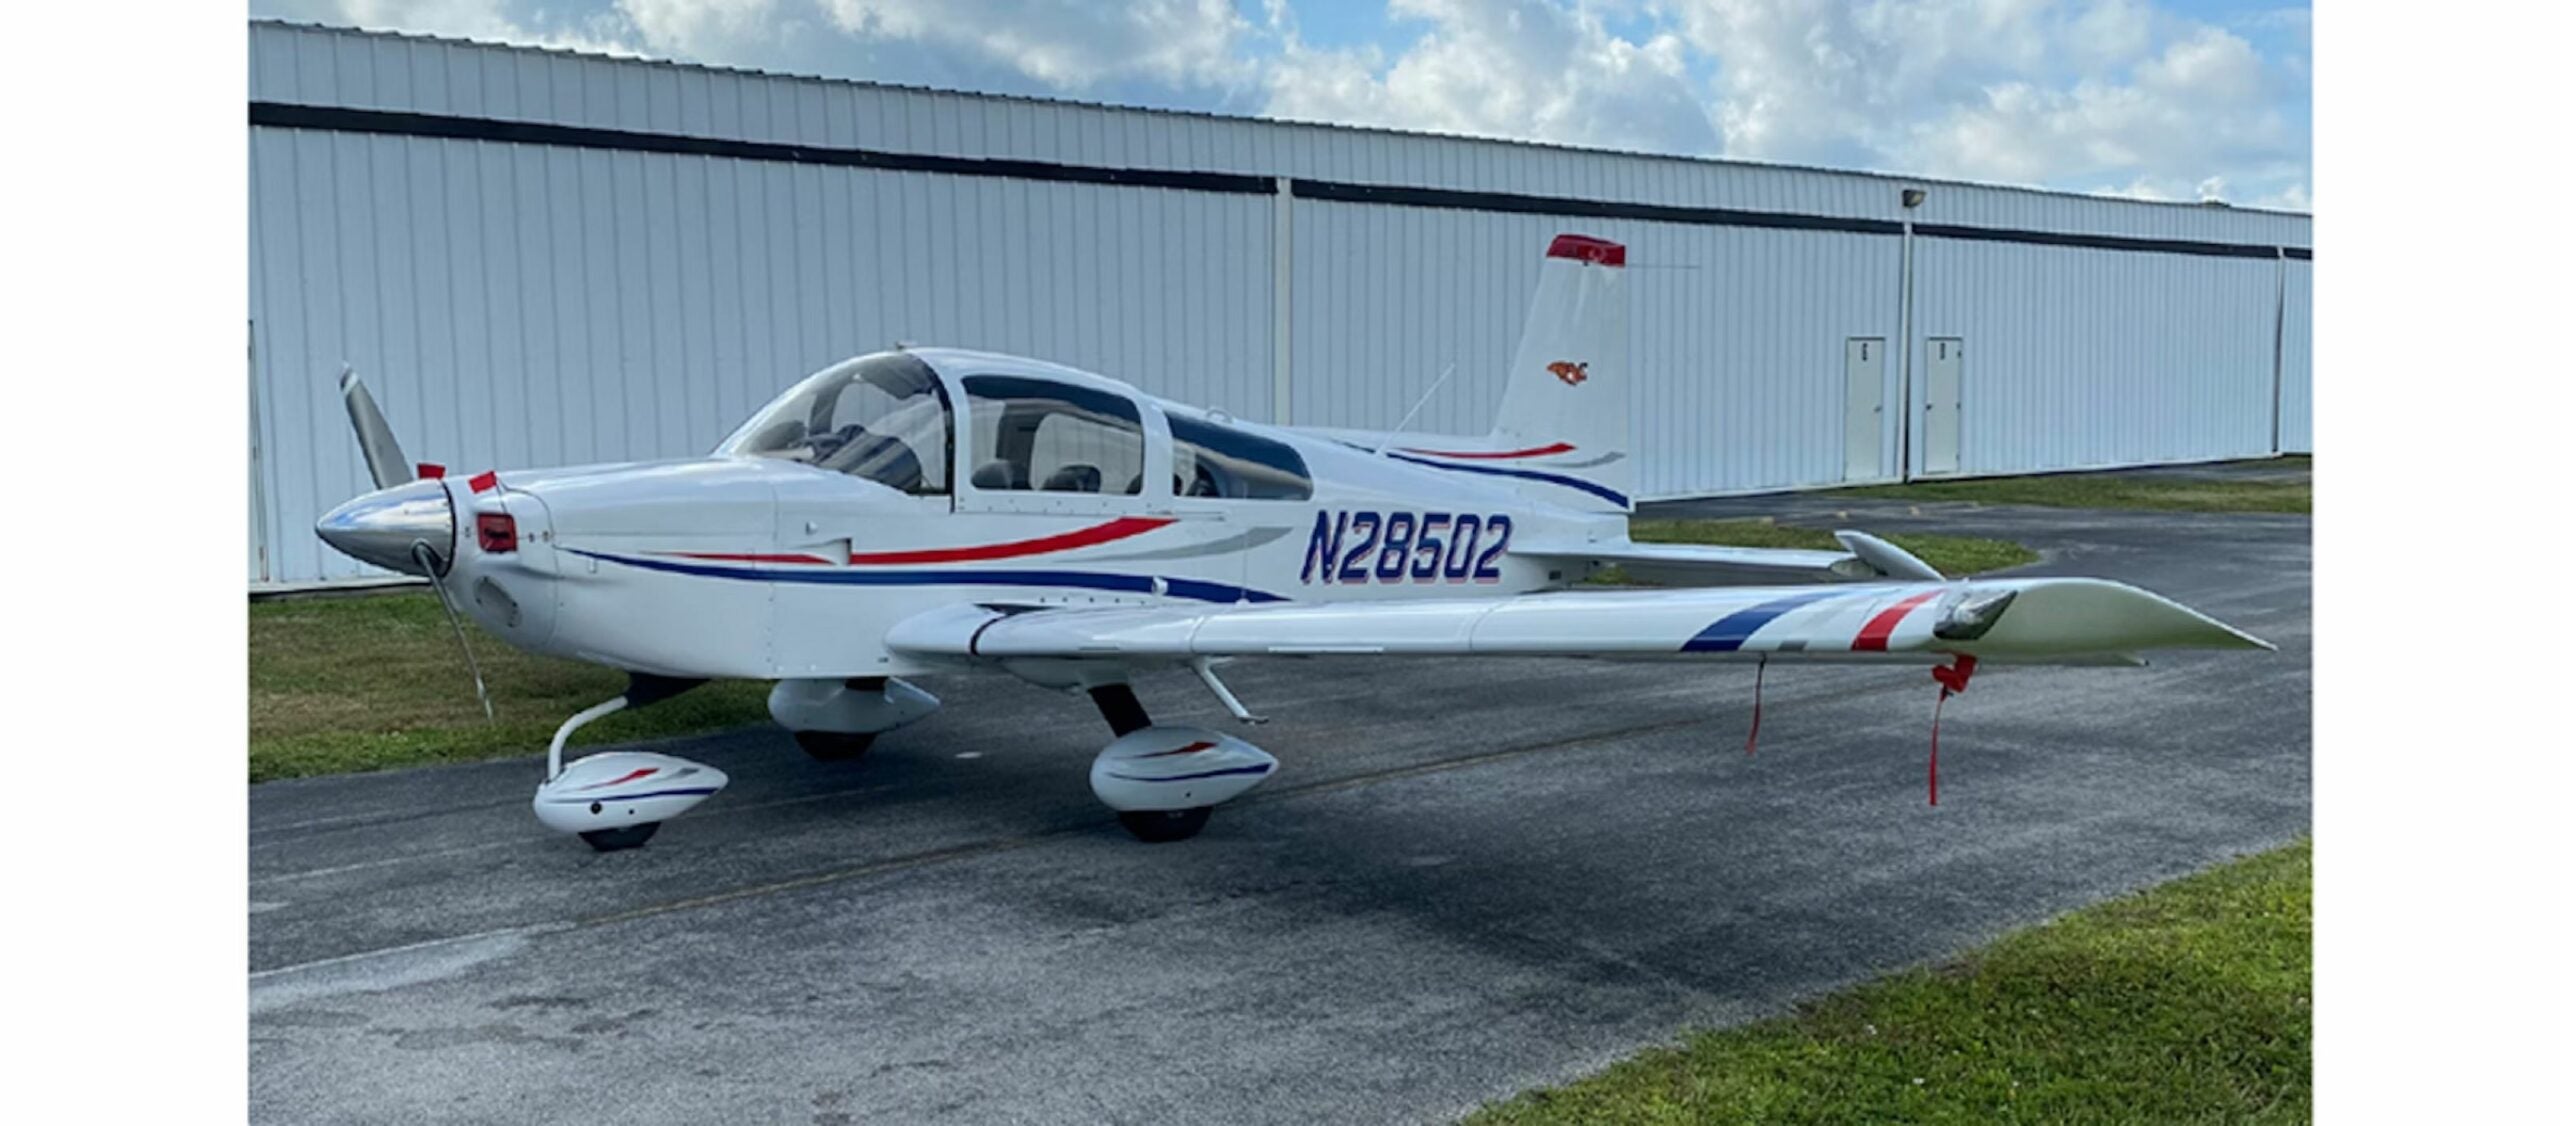 Today’s Top Aircraft For Sale Pick: 1977 Grumman American AA-5B Tiger